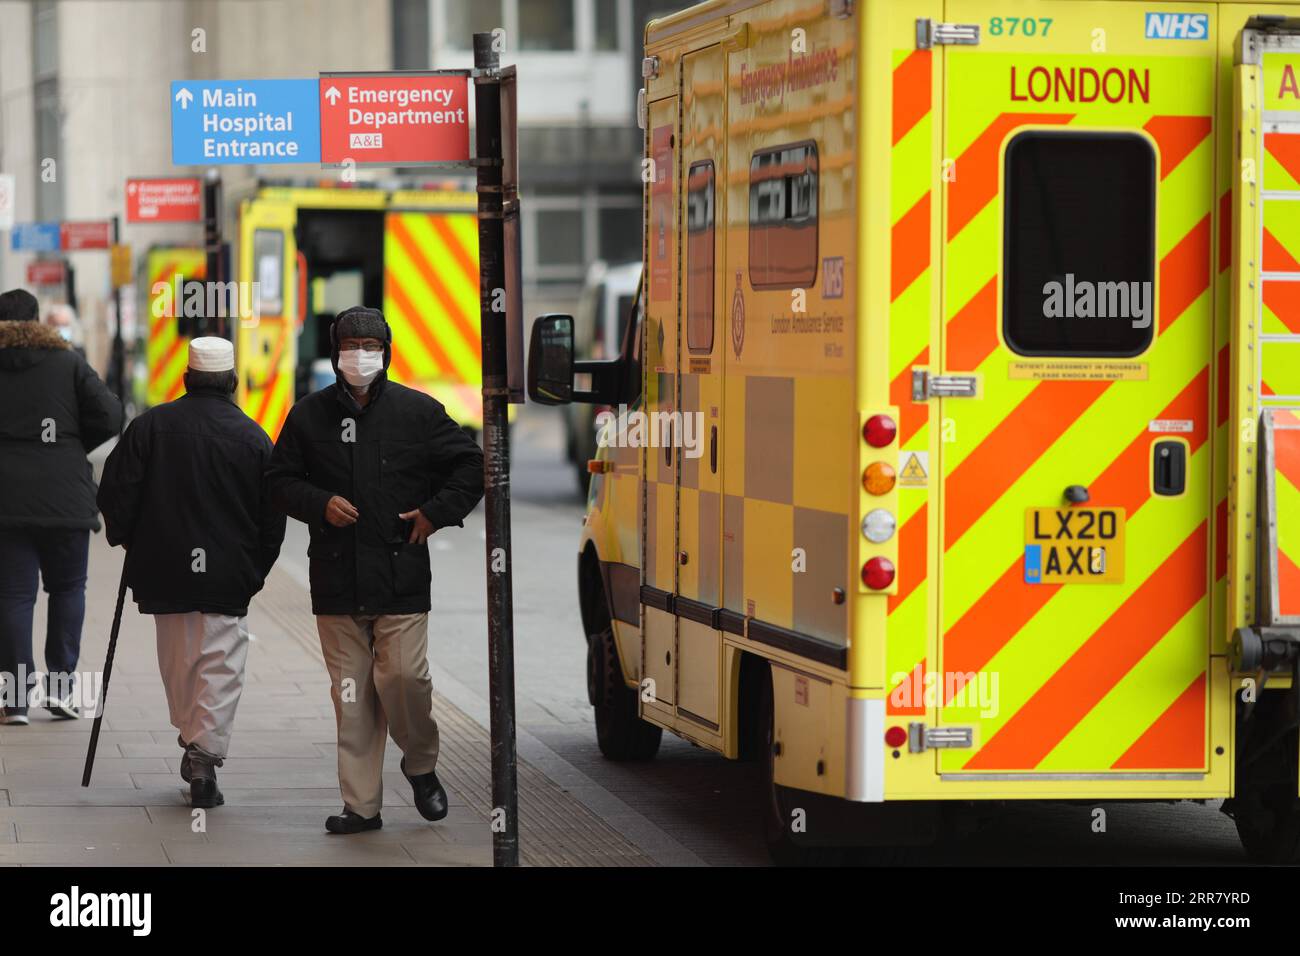 210409 -- LONDON, April 9, 2021 -- People walk past ambulances at the Royal London Hospital in London, Britain, on April 9, 2021. COVID-19 deaths in Europe surpassed the one million mark on Friday, reaching 1,001,313, according to the dashboard of the World Health Organization s Regional Office for Europe. Photo by /Xinhua BRITAIN-LONDON-COVID-19 TimxIreland PUBLICATIONxNOTxINxCHN Stock Photo